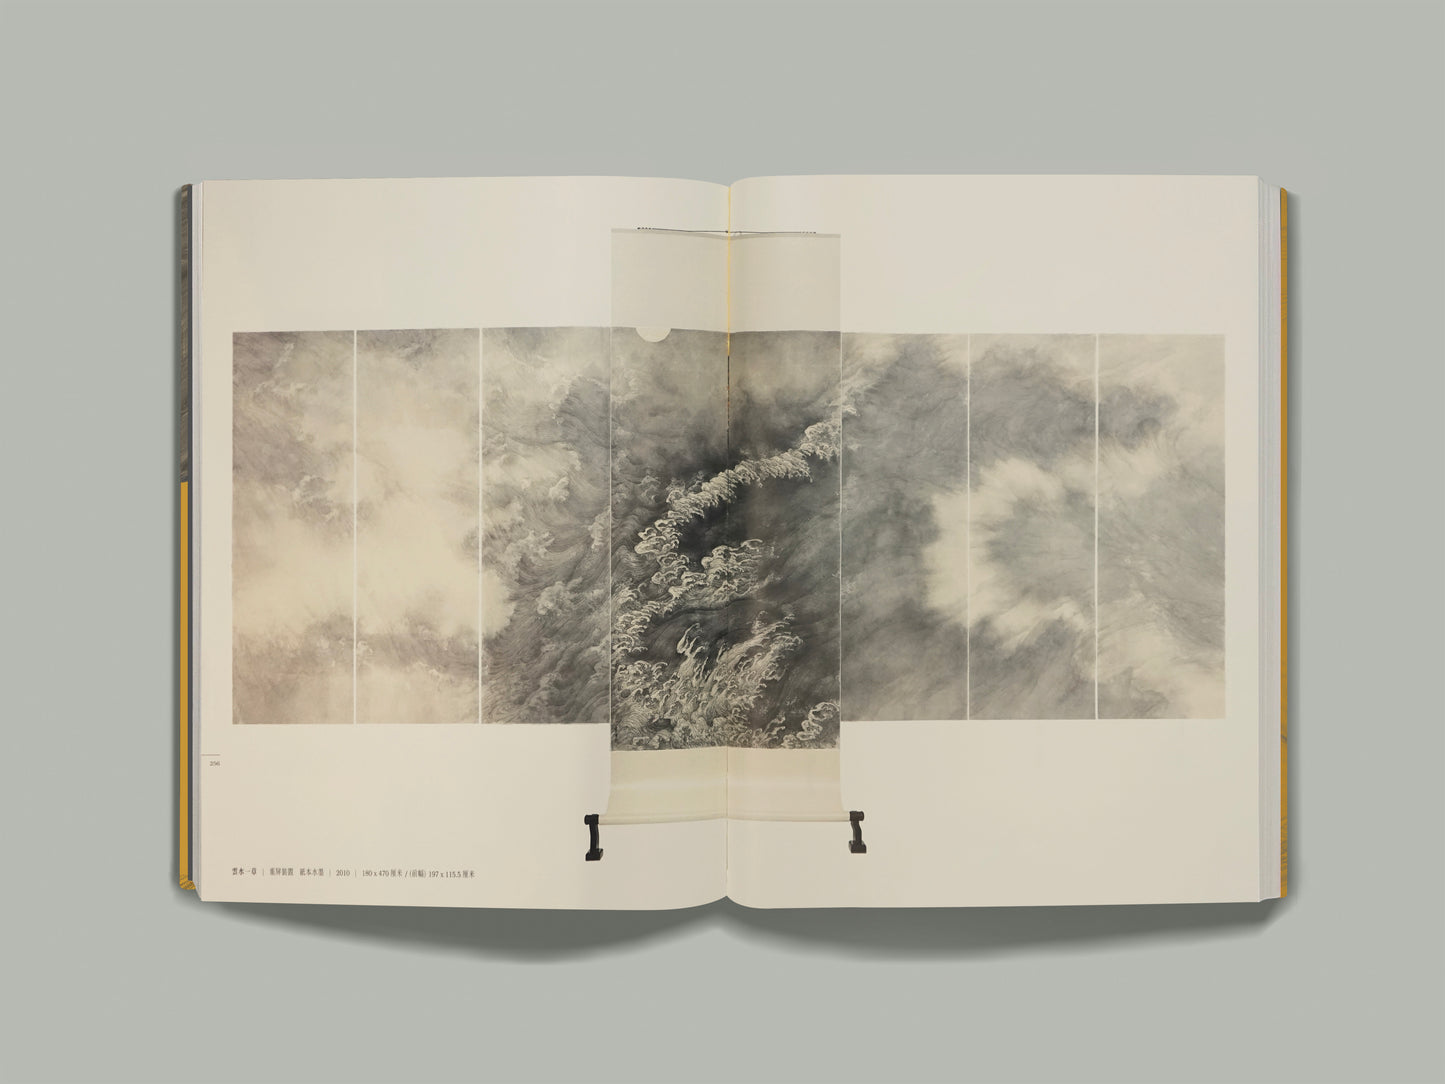 LI HUAYI: LANDSCAPES FROM A MASTER'S HEART